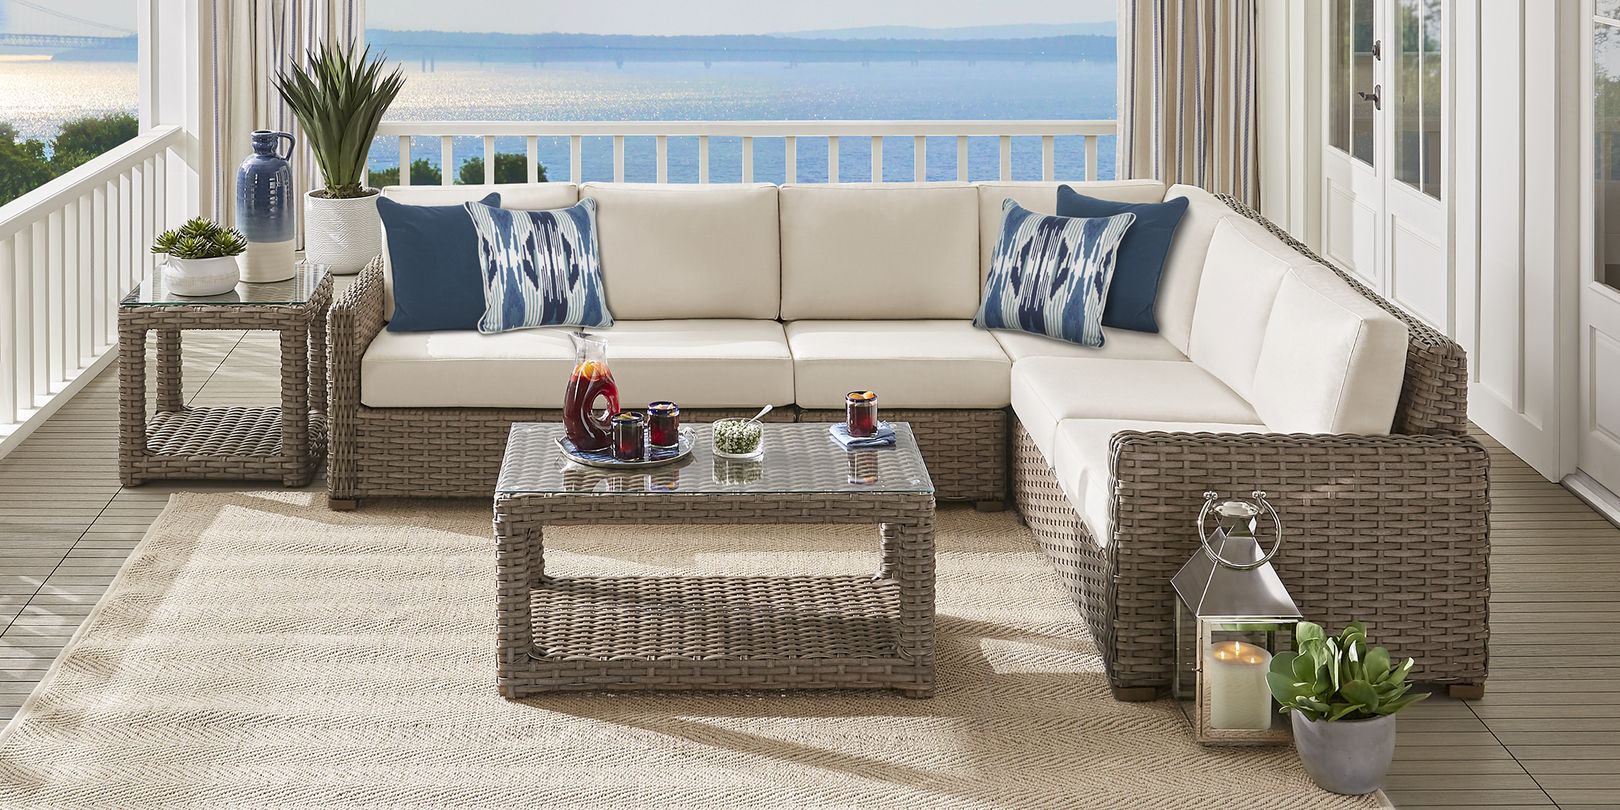 Photo of wicker patio seating set and tables